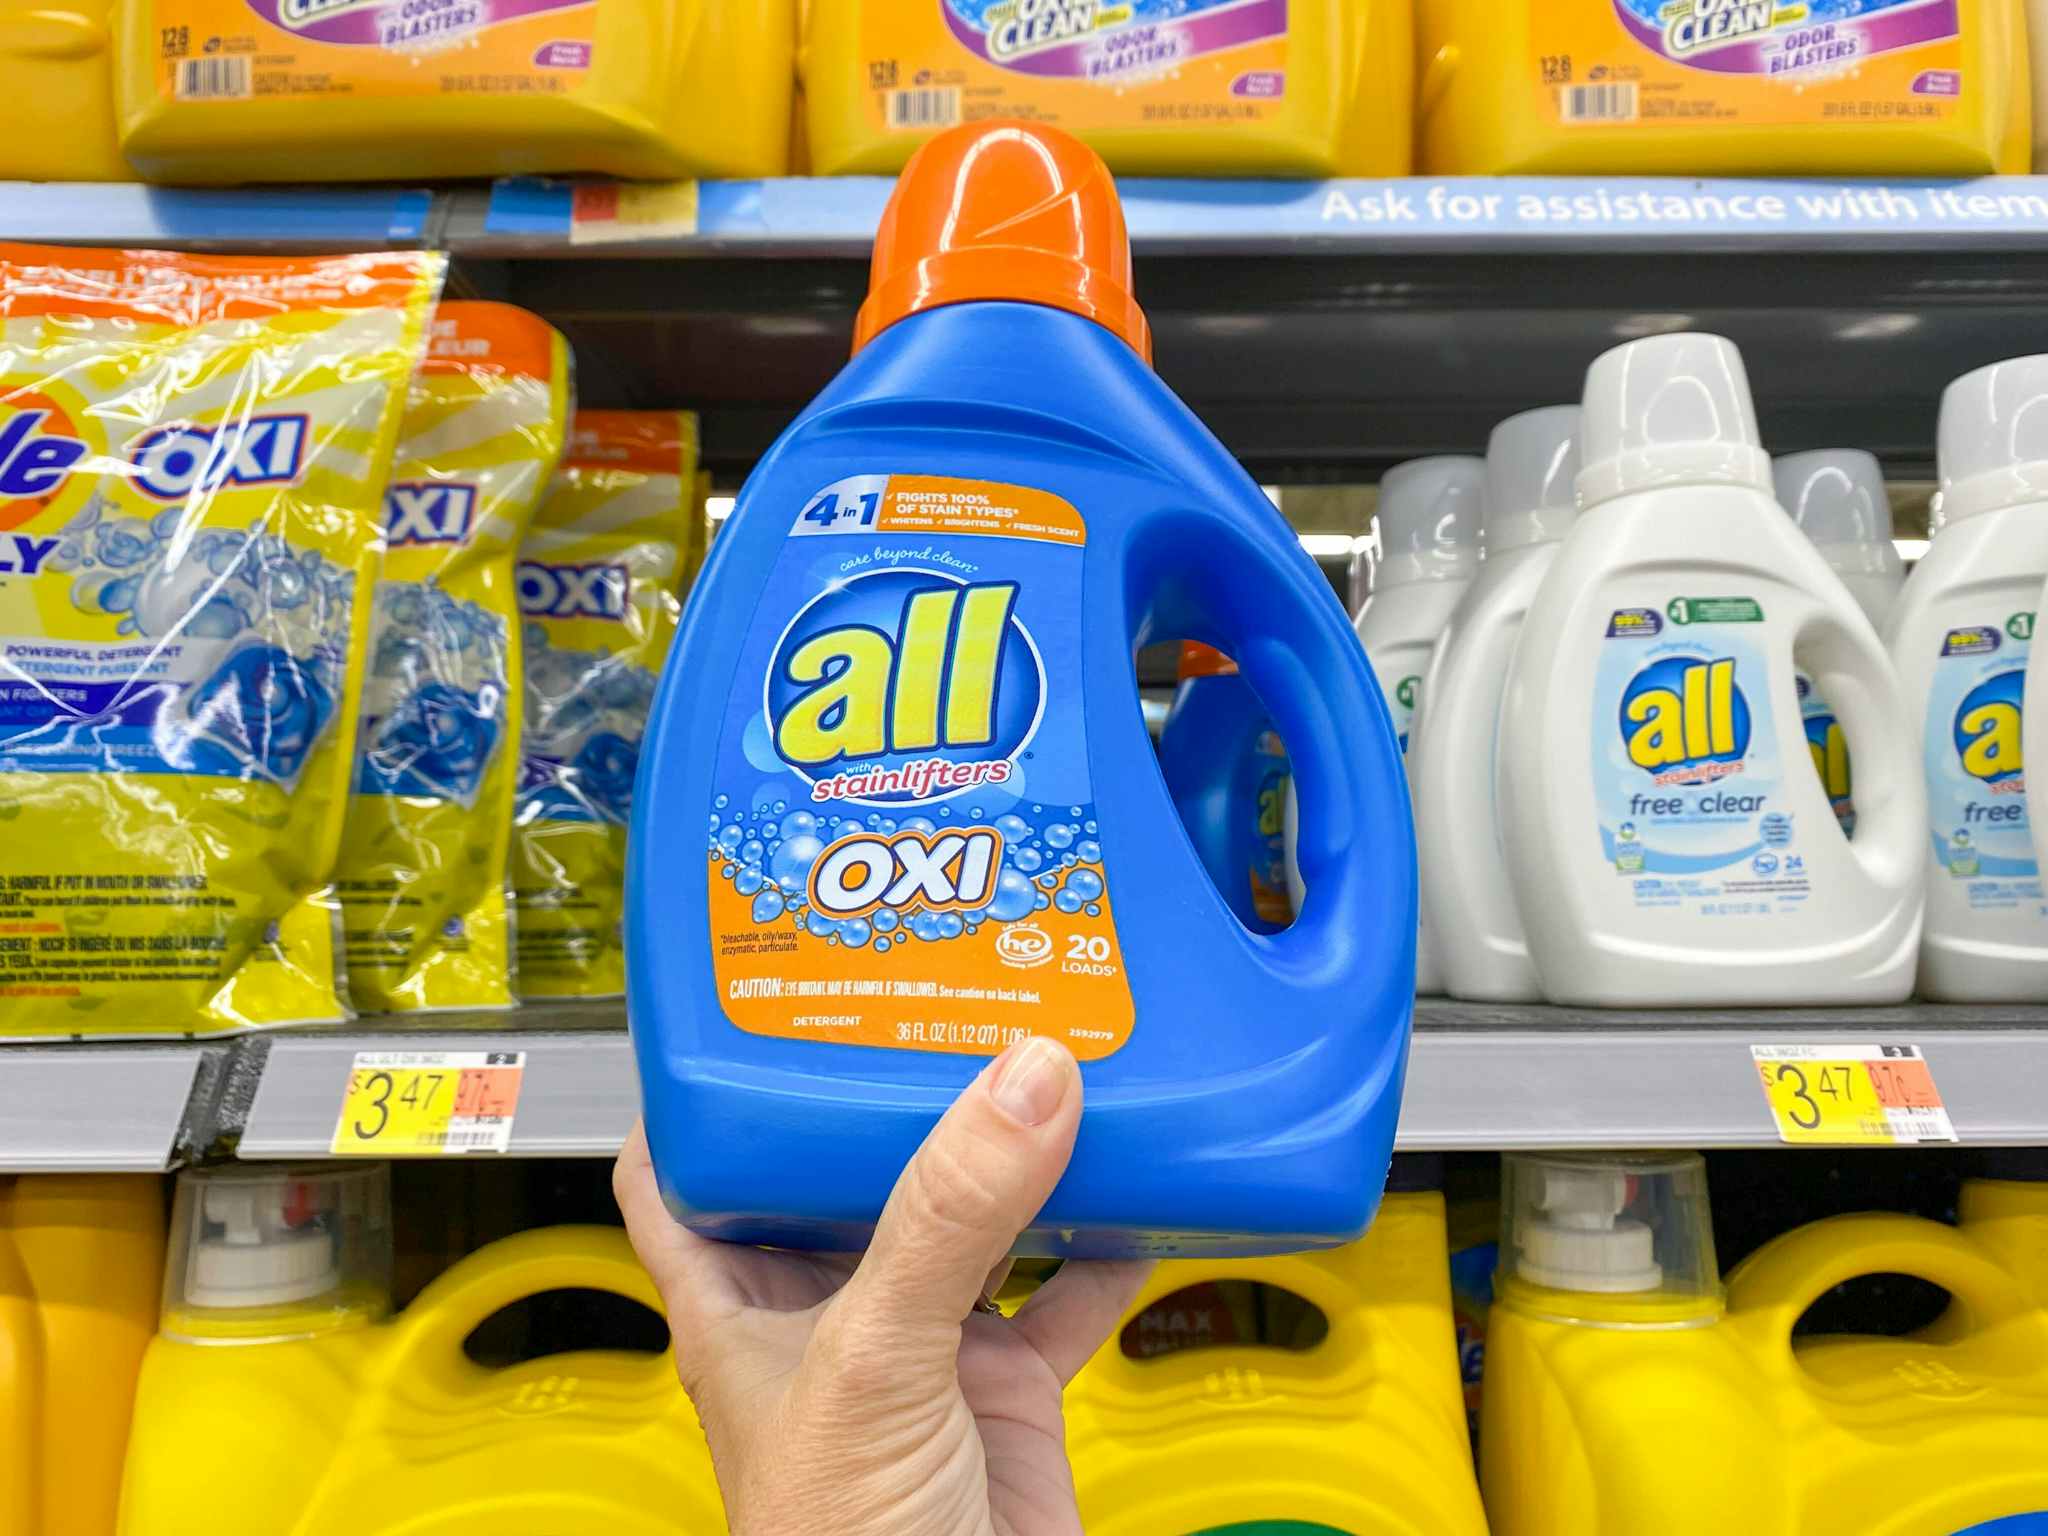 hand holding all with oxi laundry detergent at walmart